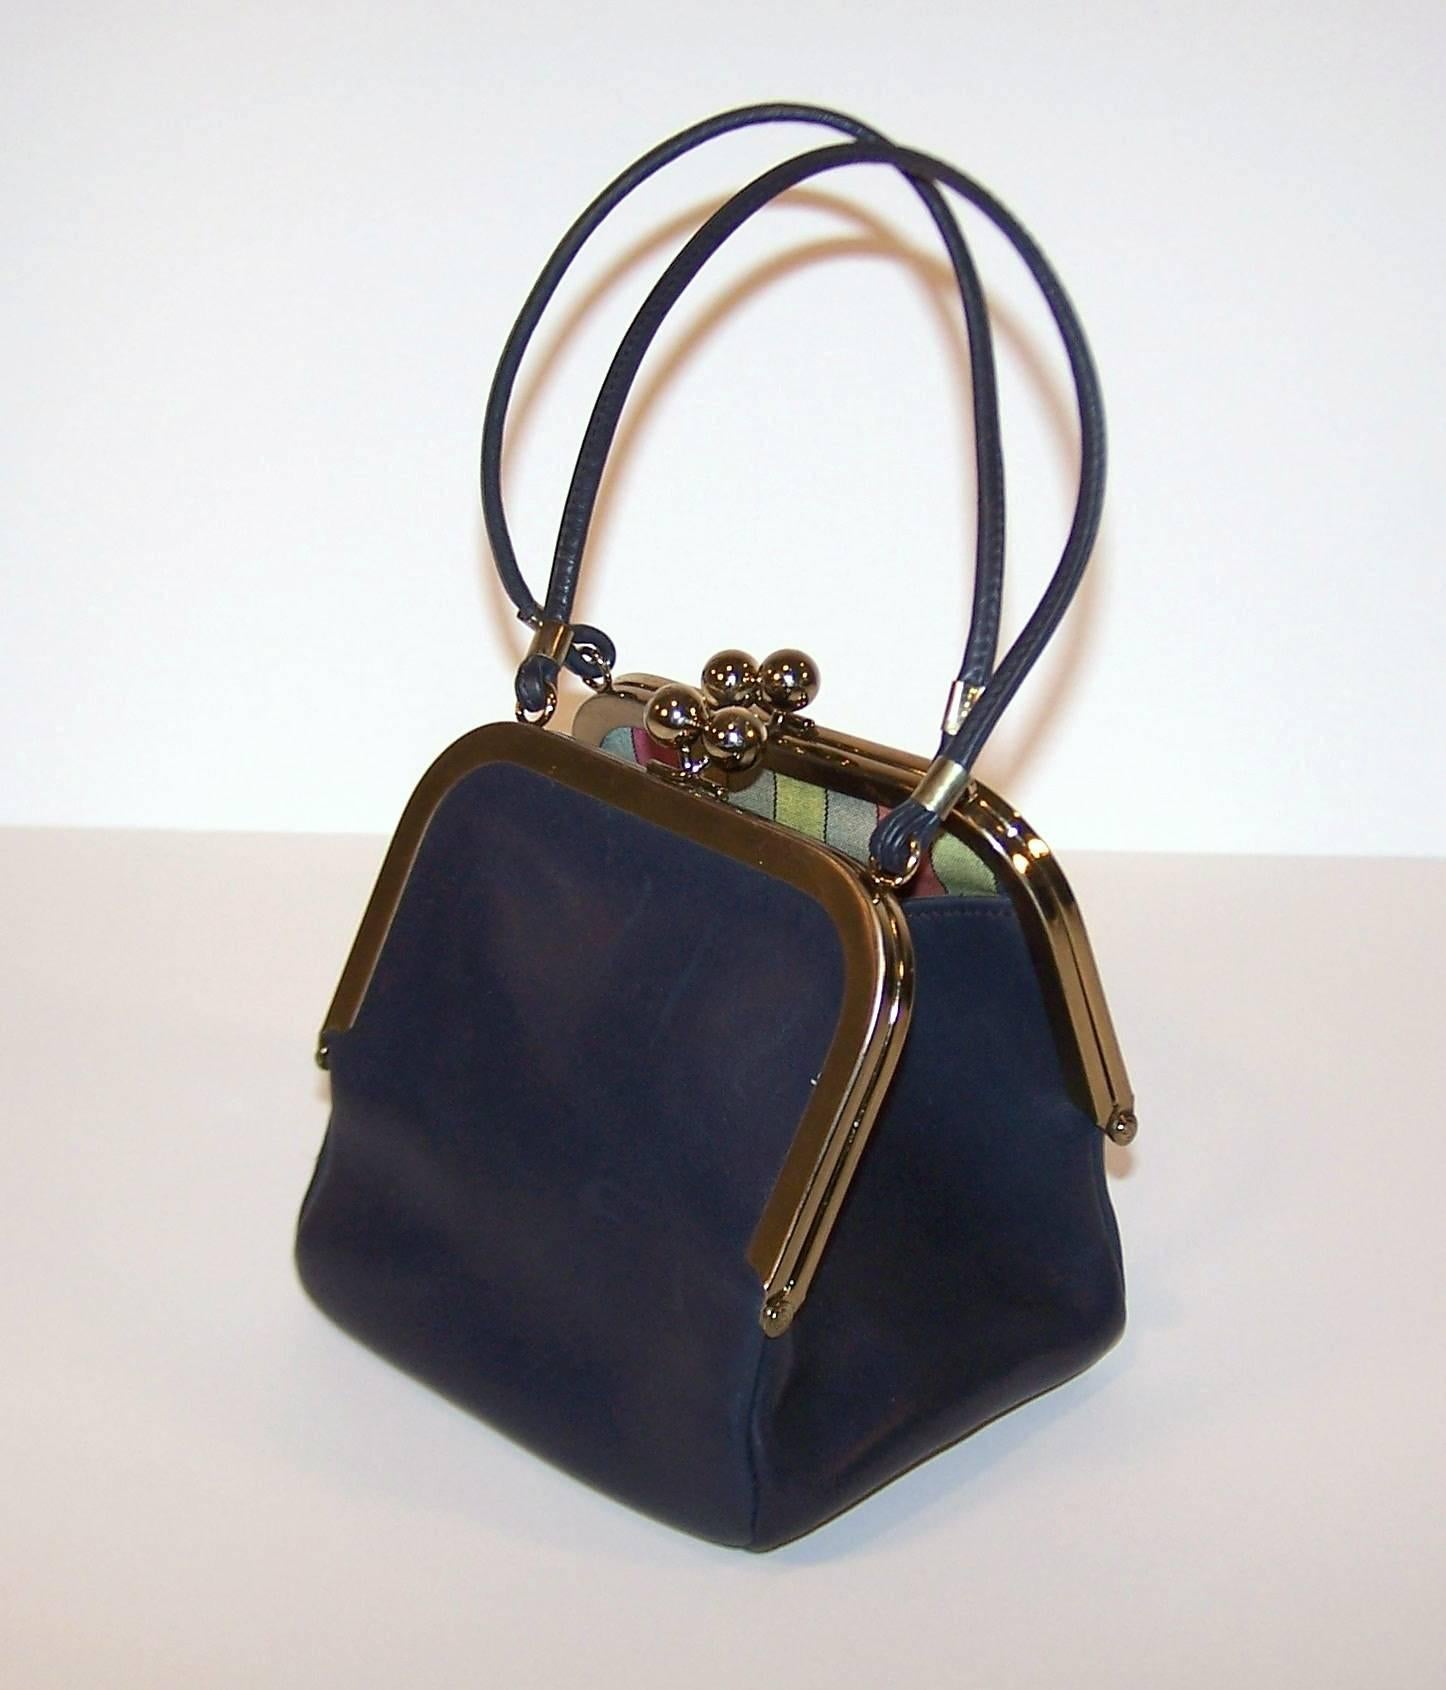 Bonnie Cashin was one of the most innovative designers of her time and her influence continues to be seen in fashionable American sportswear.  This adorable navy blue leather handbag was designed for Coach in the 1960s.  It features two kiss lock